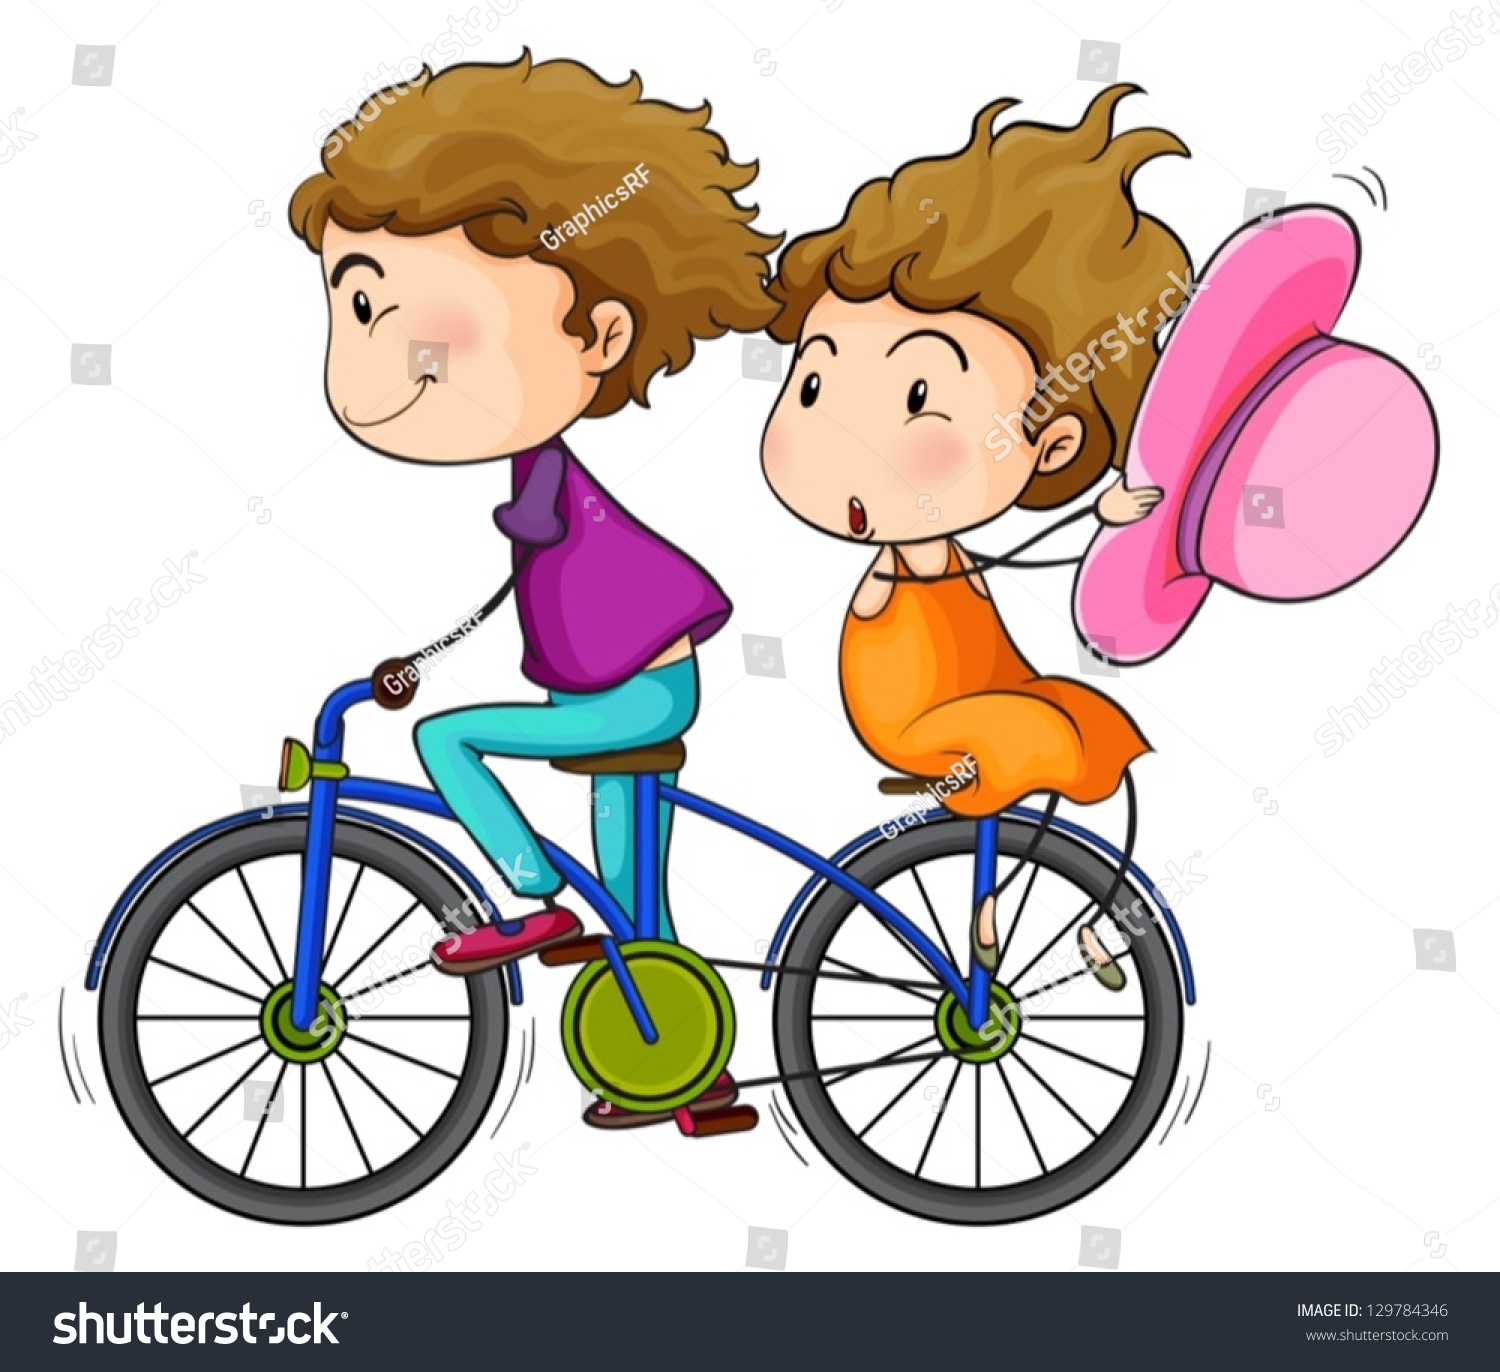 free clipart bicycle built for two - photo #19